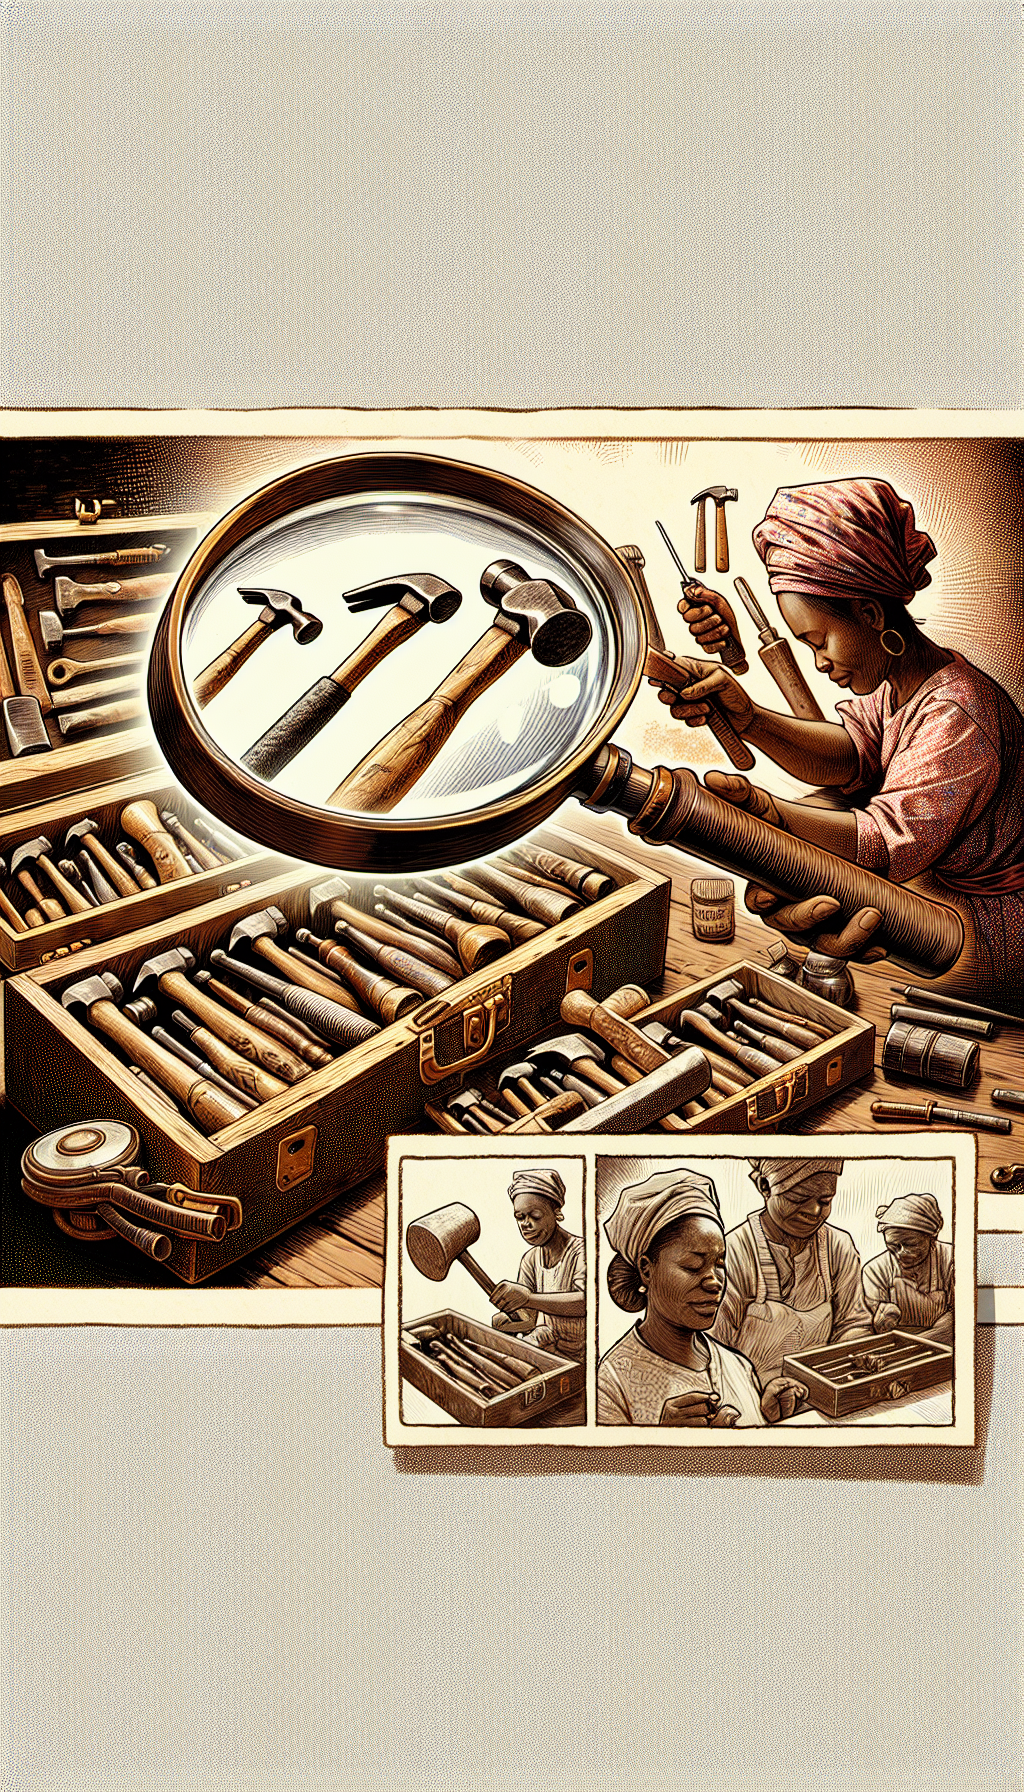 An illustration showcases a magnifying glass overlaying a vintage, wooden toolbox filled with diverse antique hammers, each with a unique tag describing its era and origin. The glass zooms in on a caretaker's gentle hands, dusting and oiling a hammer while an inset comic strip depicts 'before-and-after' preservation steps. The background subtly transitions from sepia to full color, symbolizing the transition from old and forgotten to well-preserved and treasured.